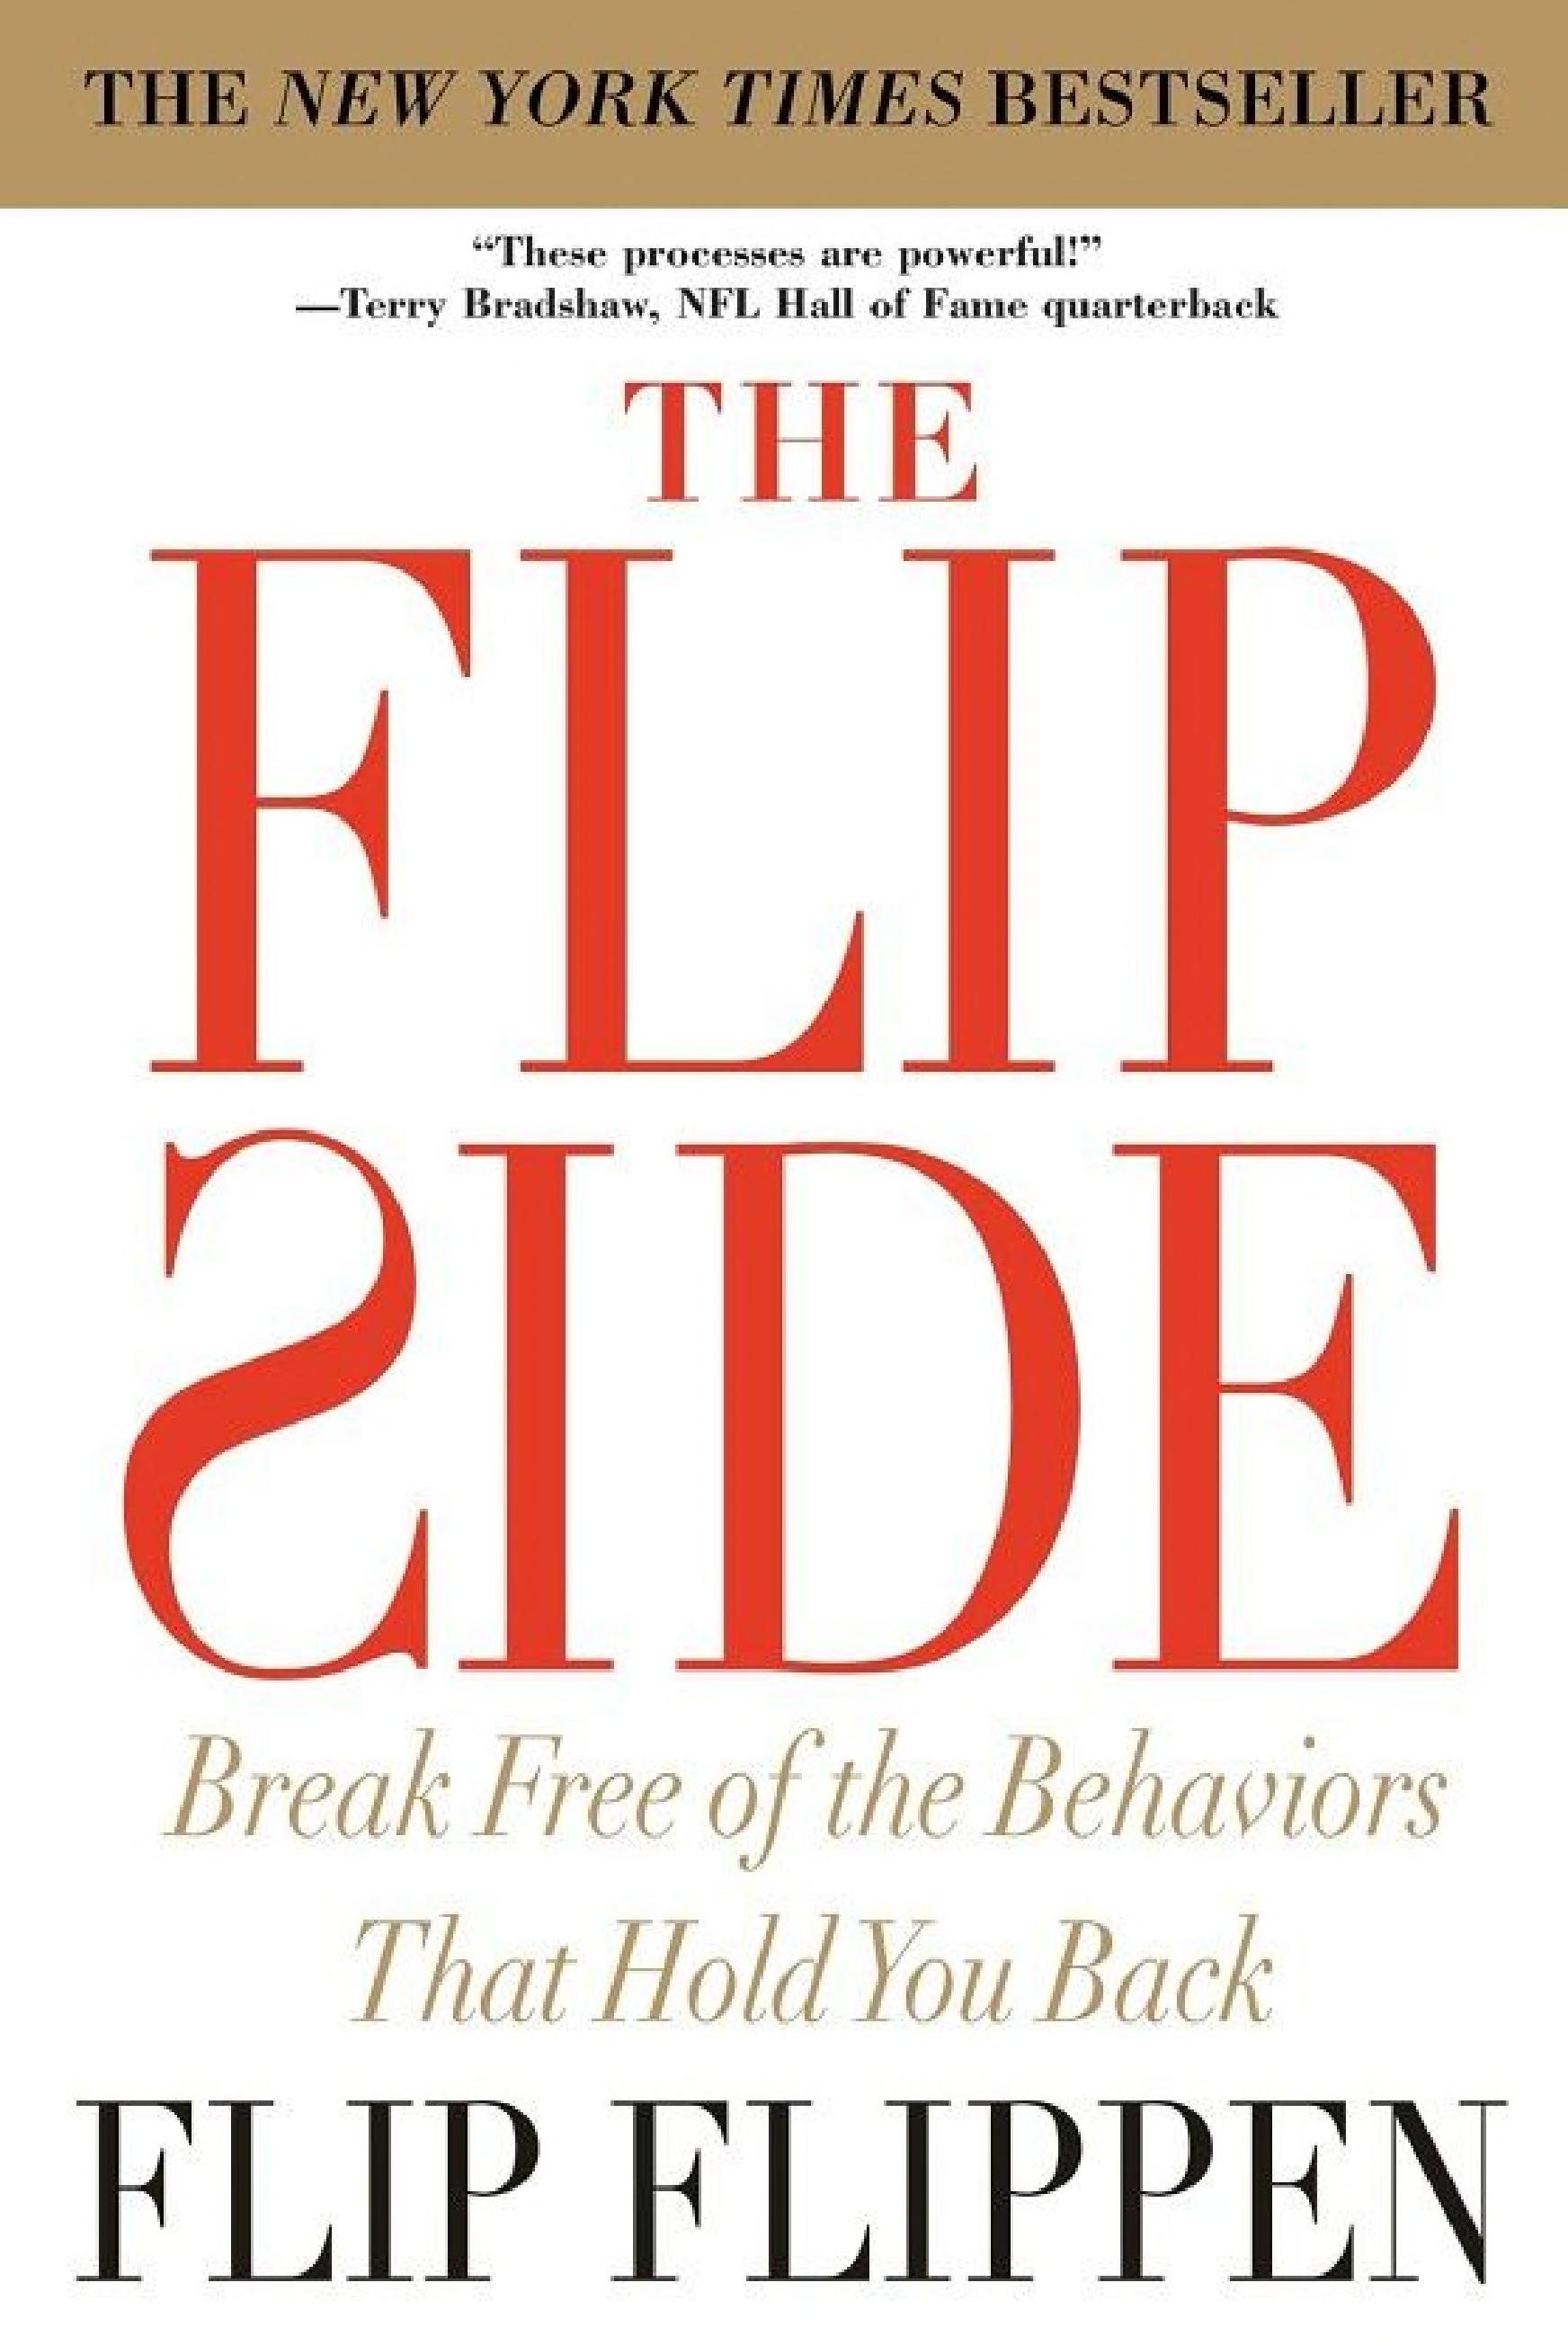 The Flip Side: Break Free of the Behaviors That Hold You Back - PDF